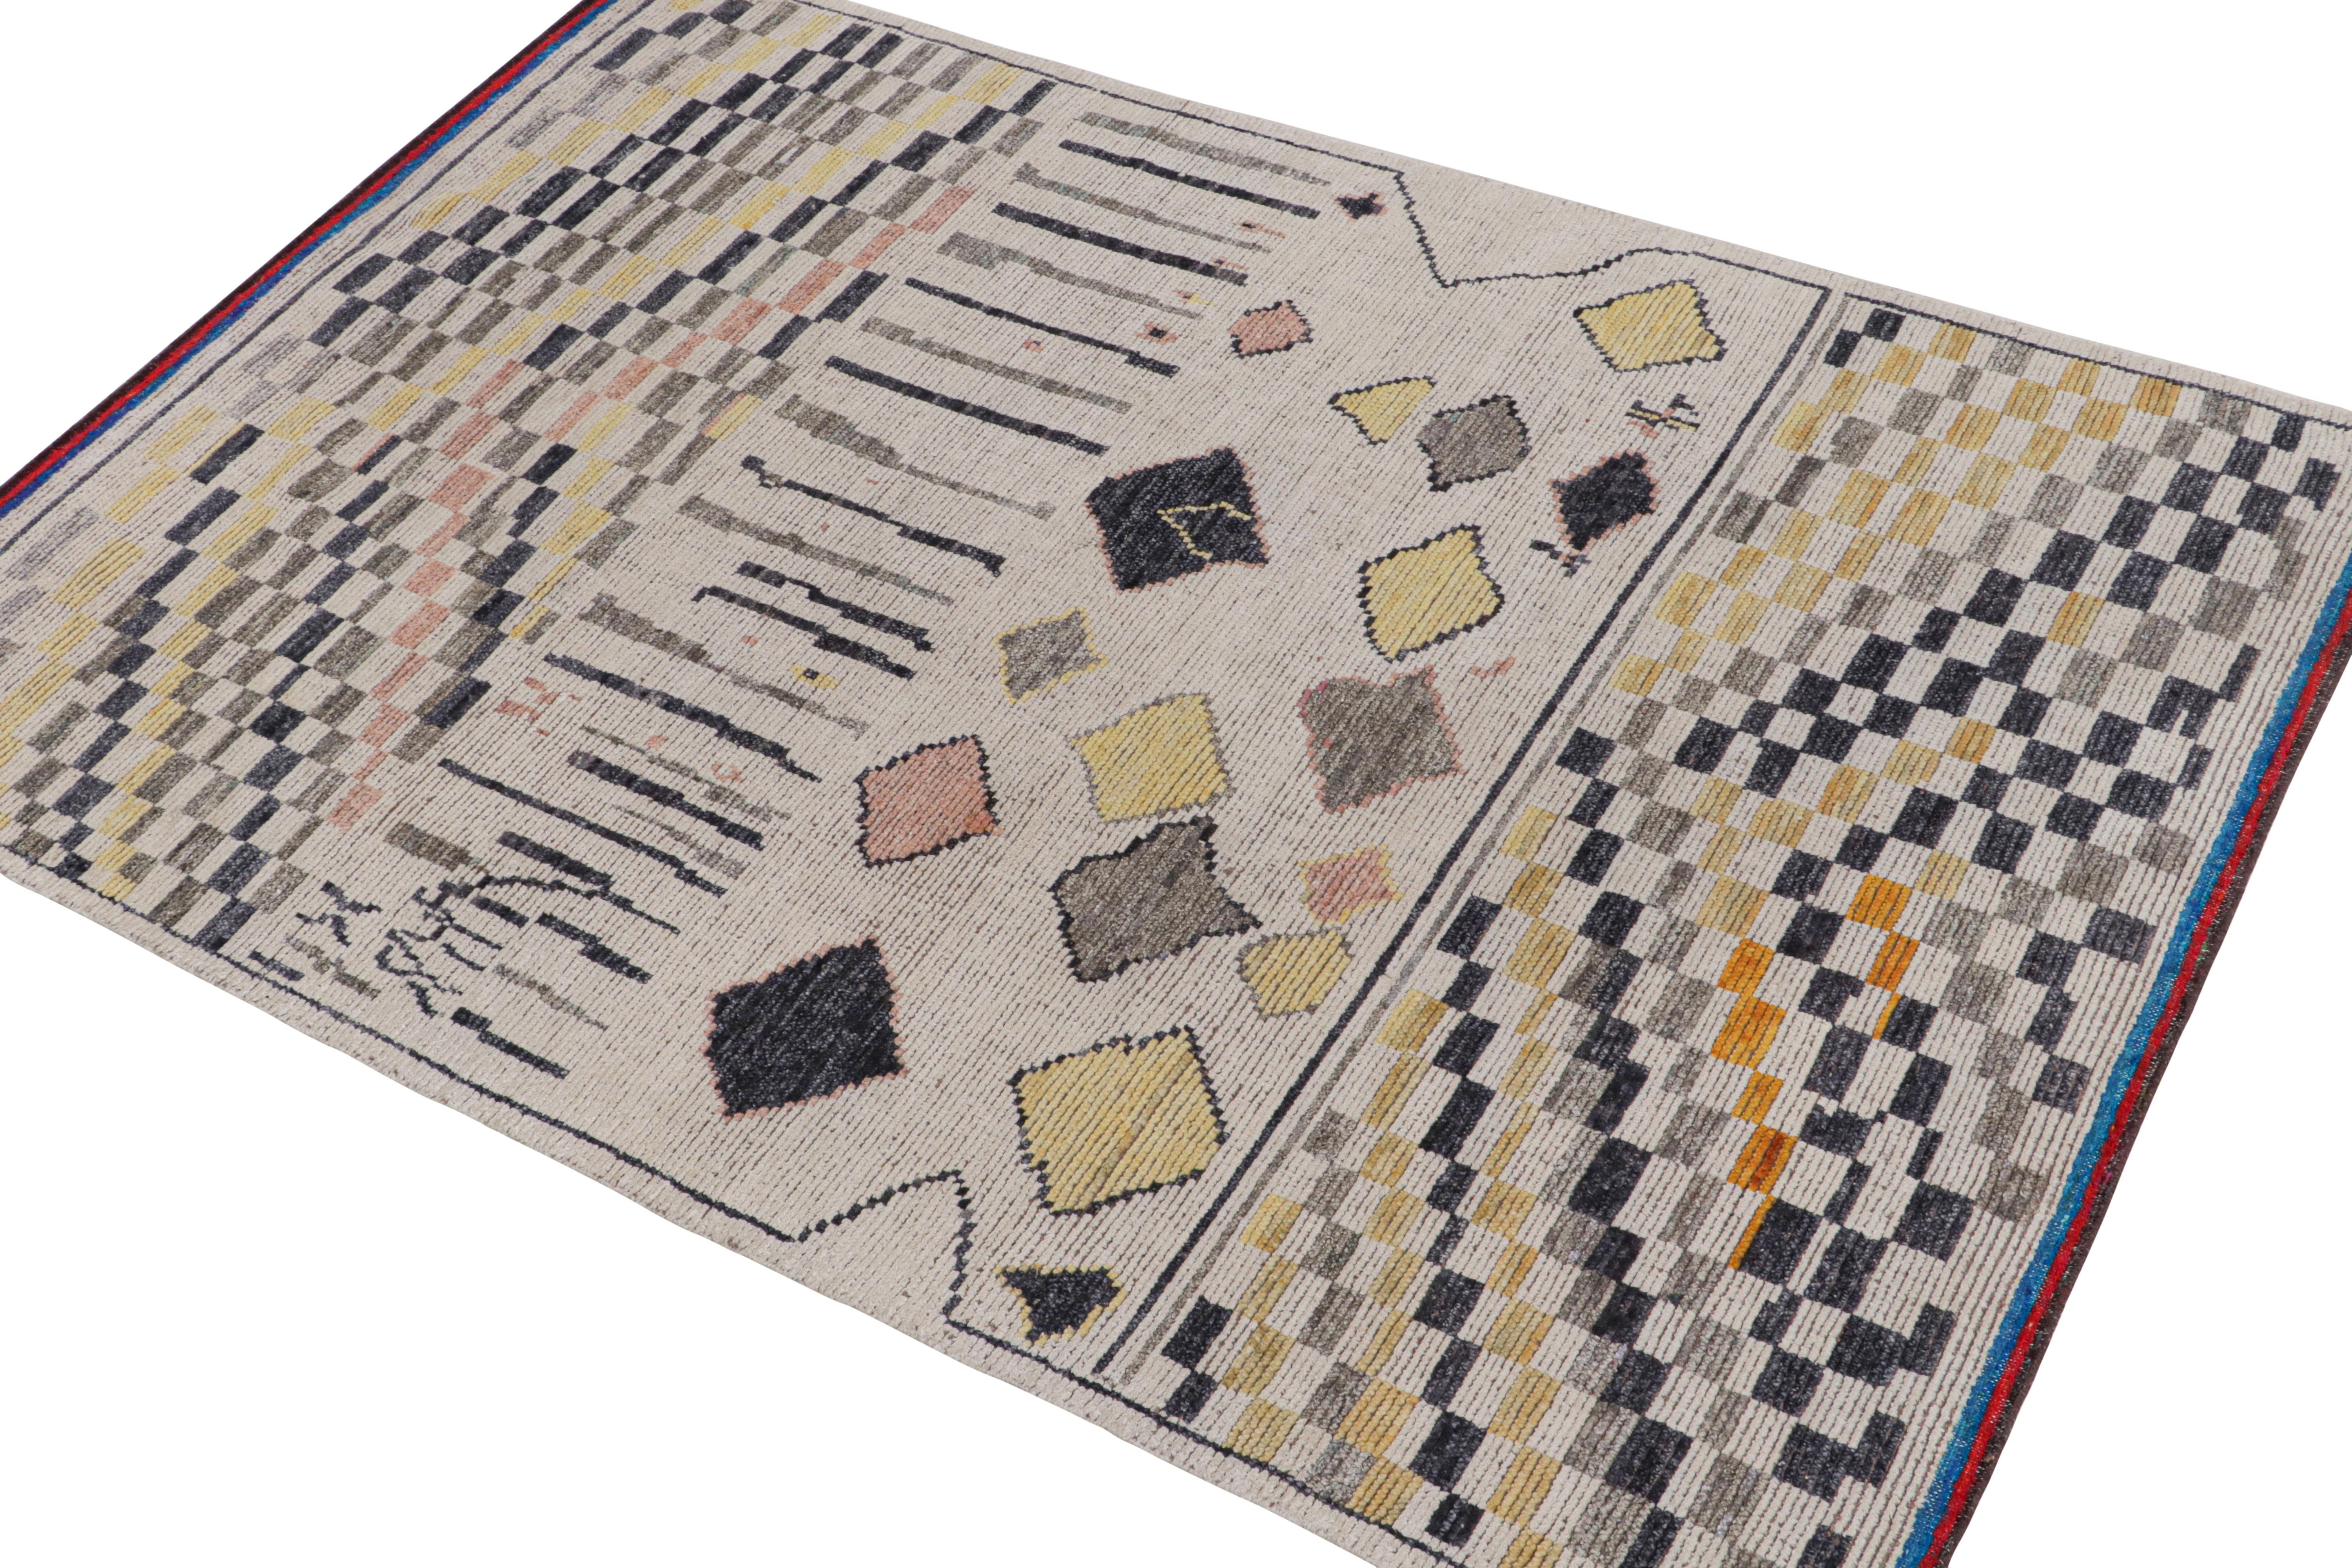 This contemporary 6x9 rug is the newest entry to Rug & Kilim's new Moroccan Collection—a bold take on the iconic style. Hand-knotted in a blend of wool, silk, and cotton.
Further on the Design:
The design takes inspiration from playful archaic